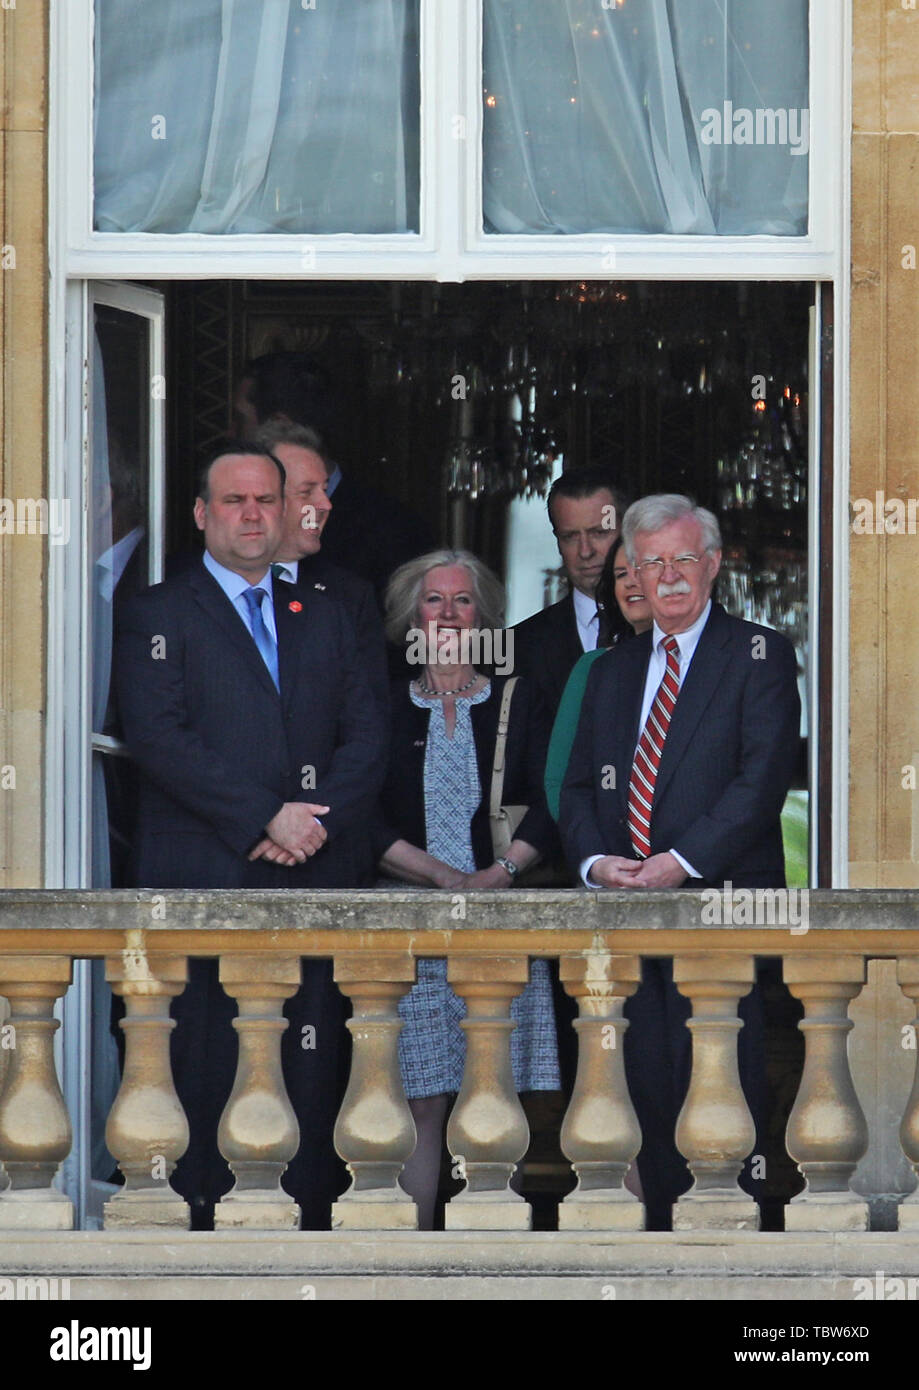 John Bolton (right), National Security Advisor of The United States, during the Ceremonial Welcome at Buckingham Palace, London, on day one of his three day state visit to the UK. Stock Photo